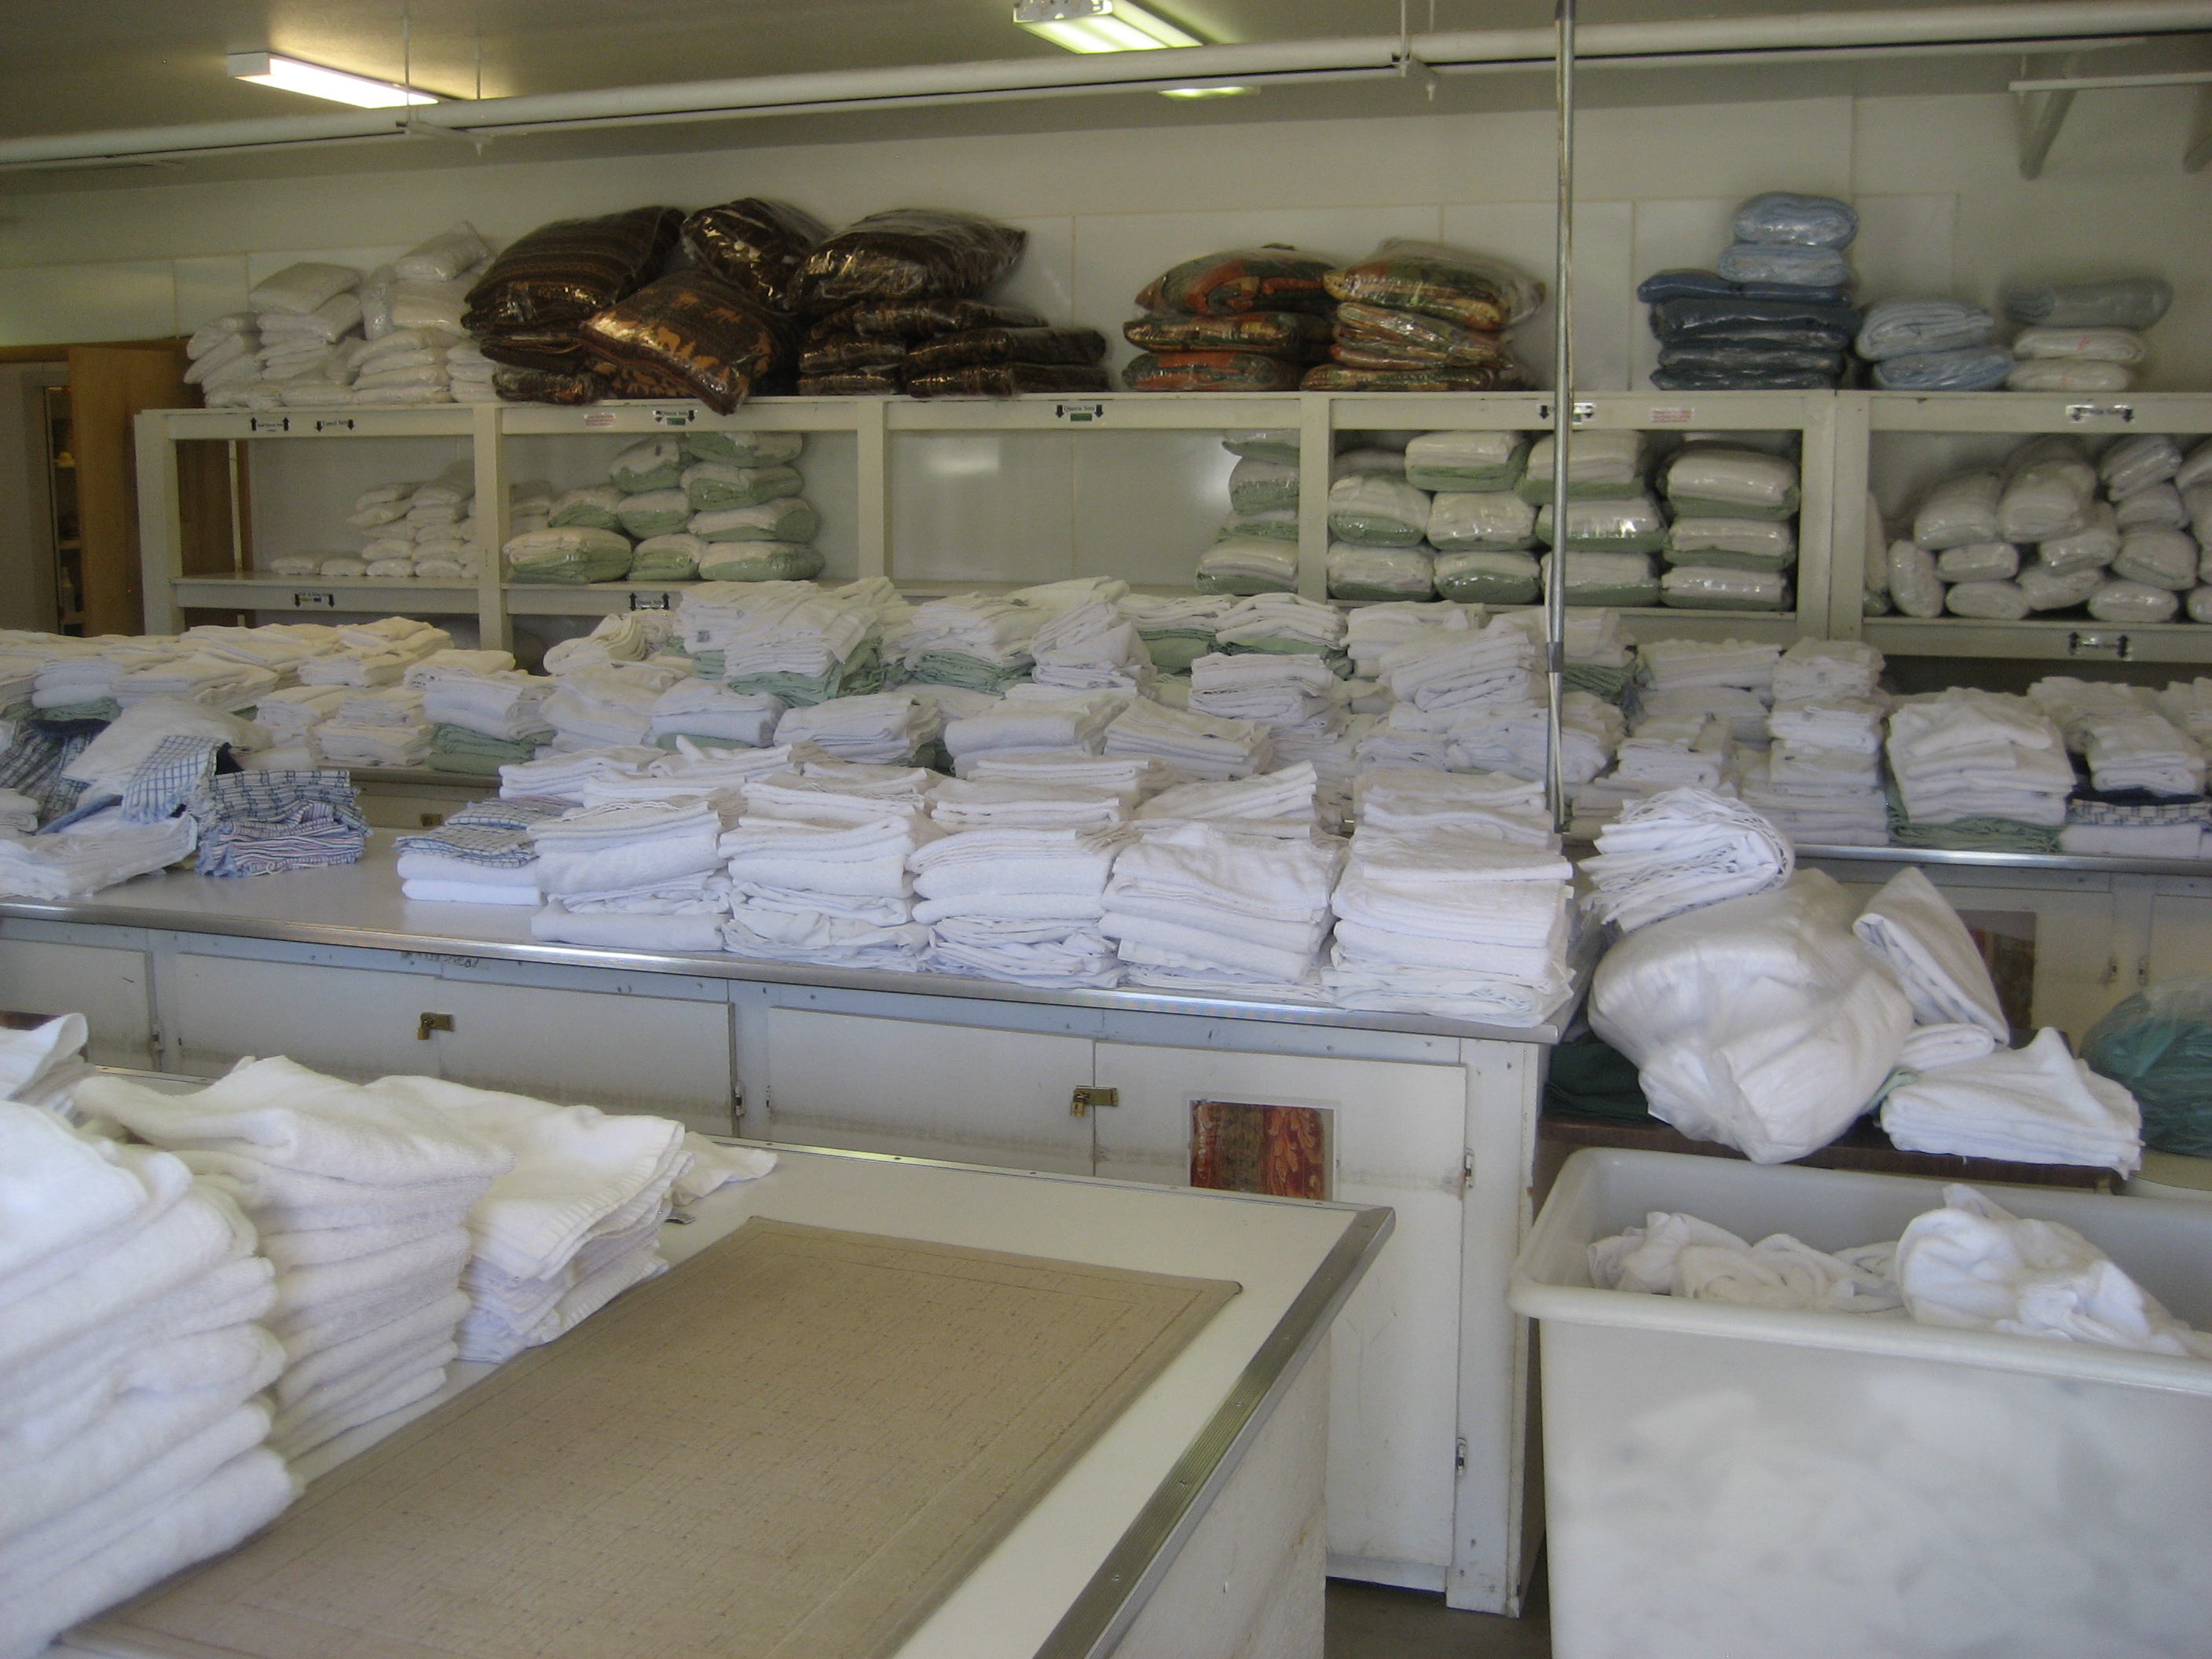 Towels, linens folded and ready to go back into guest rooms